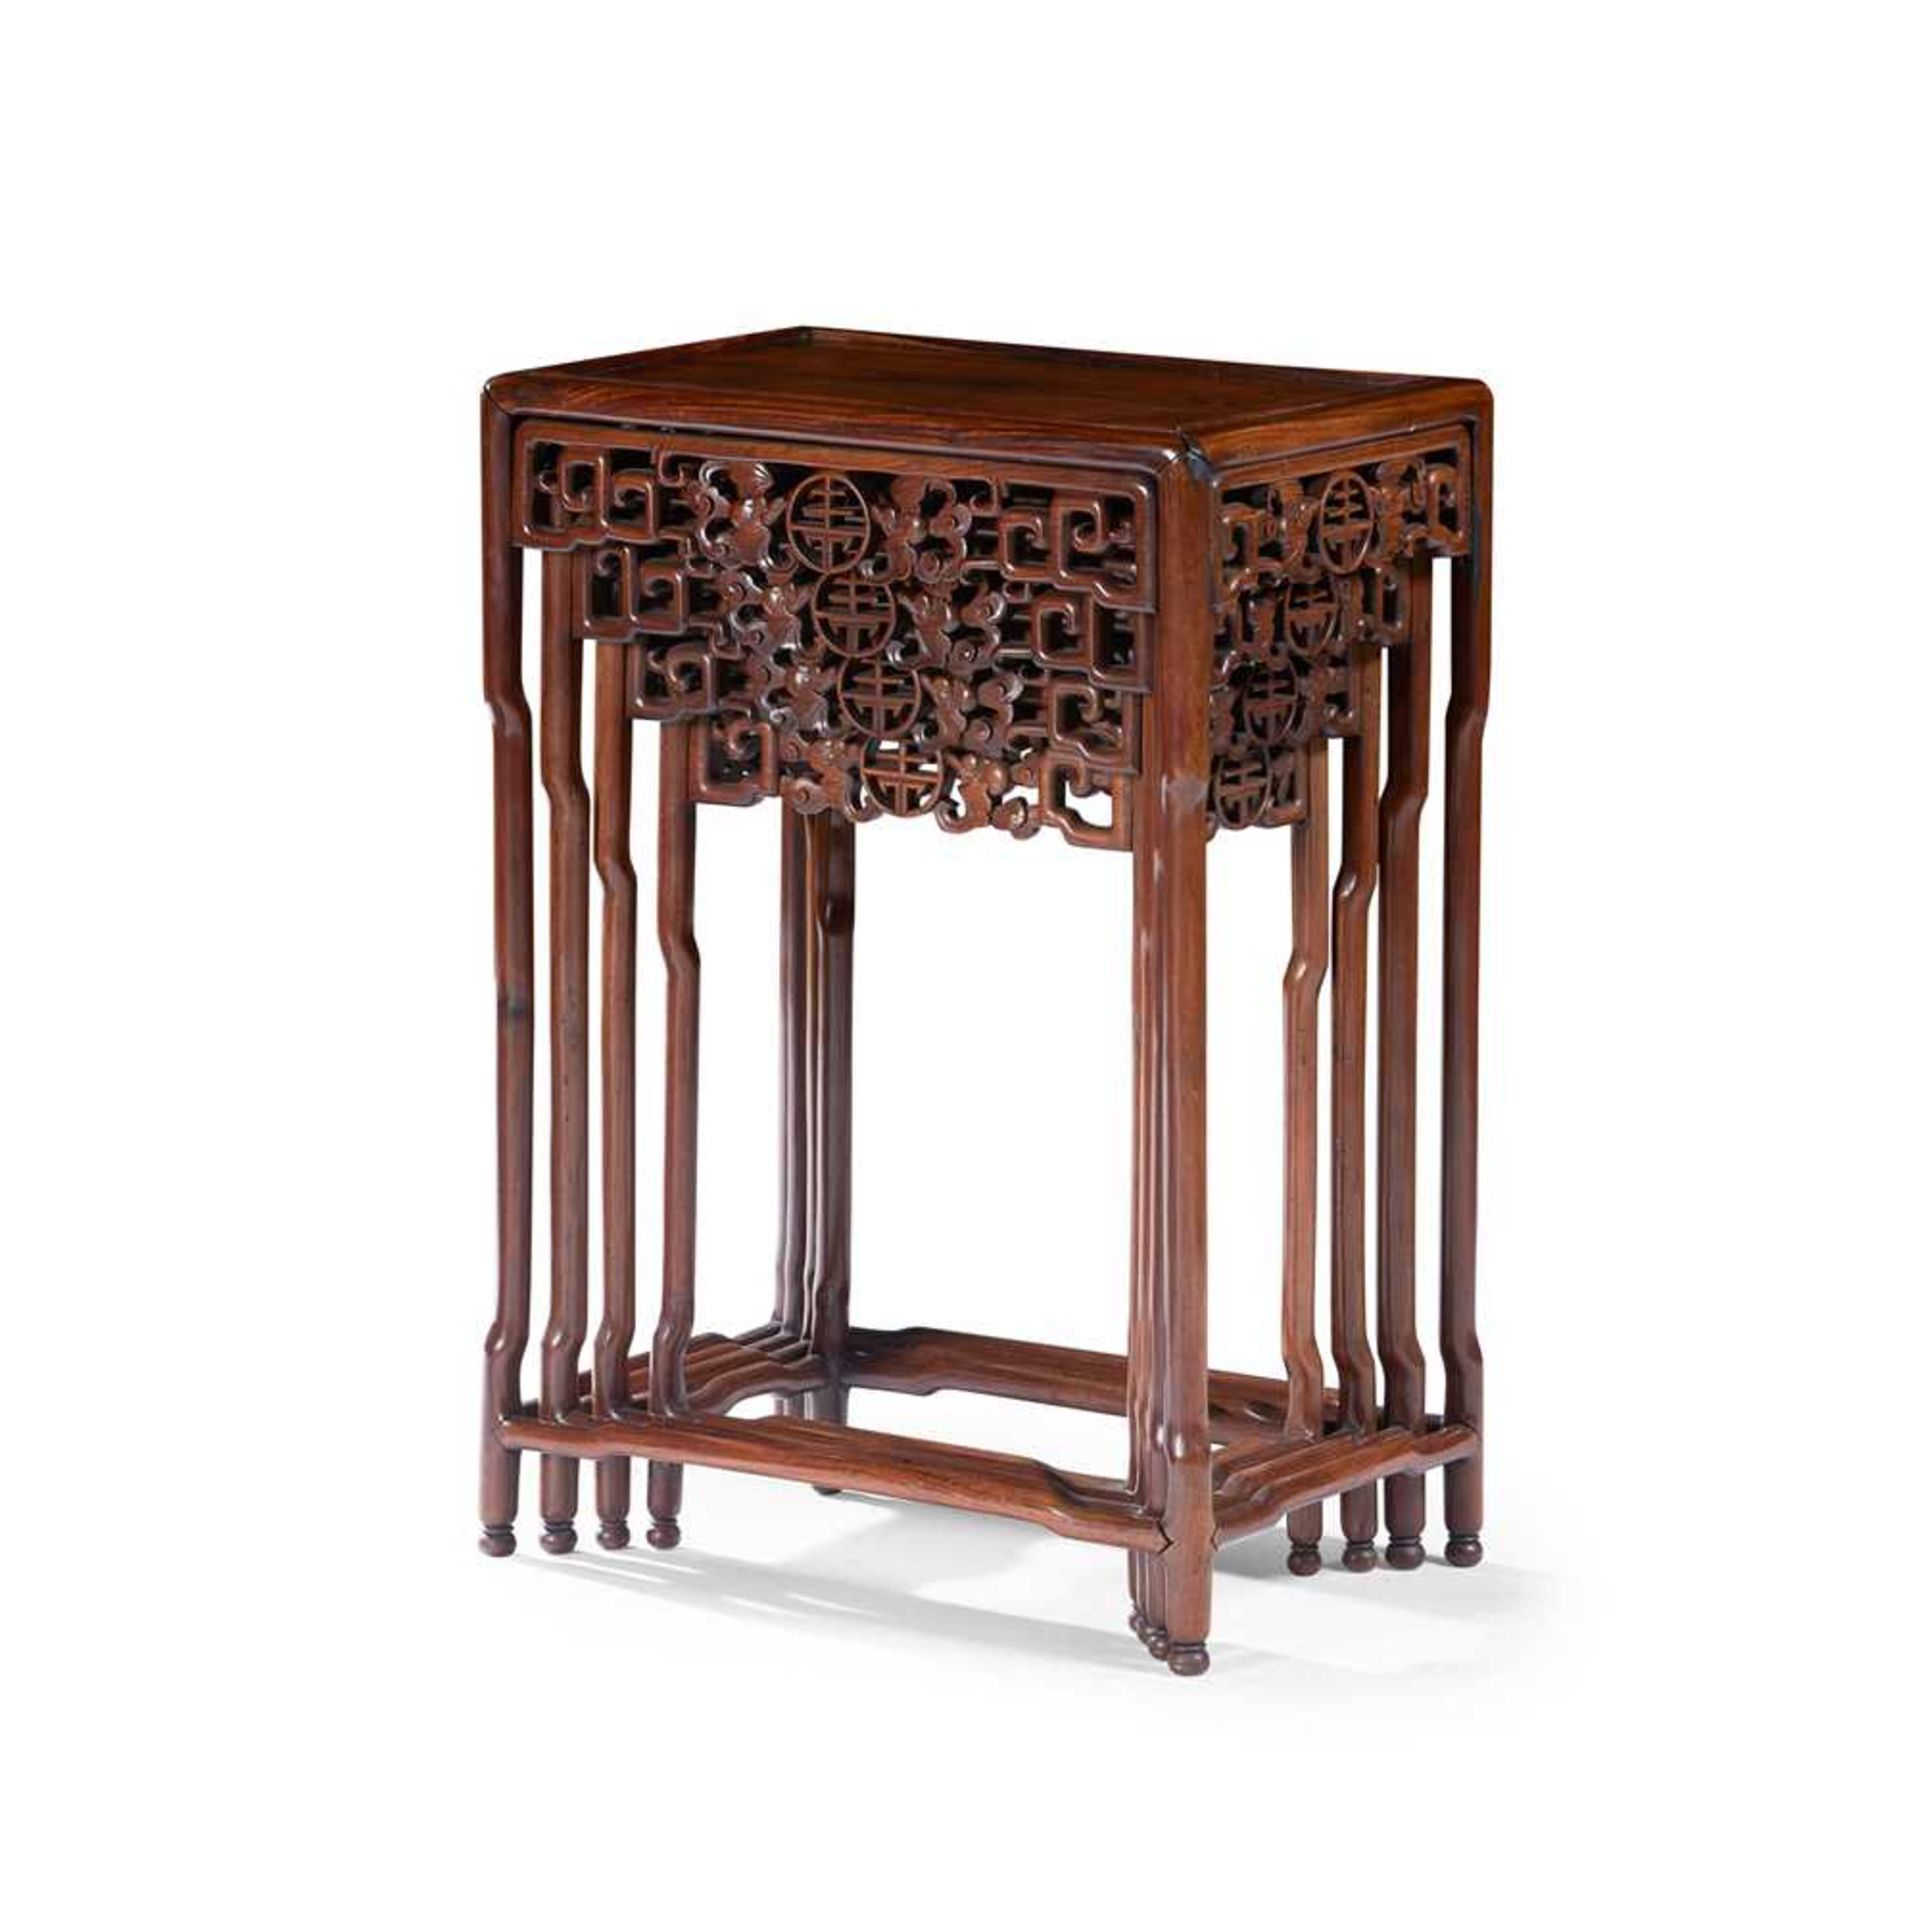 SET OF CHINESE HARDWOOD NESTING TABLES LATE 19TH/ EARLY 20TH CENTURY